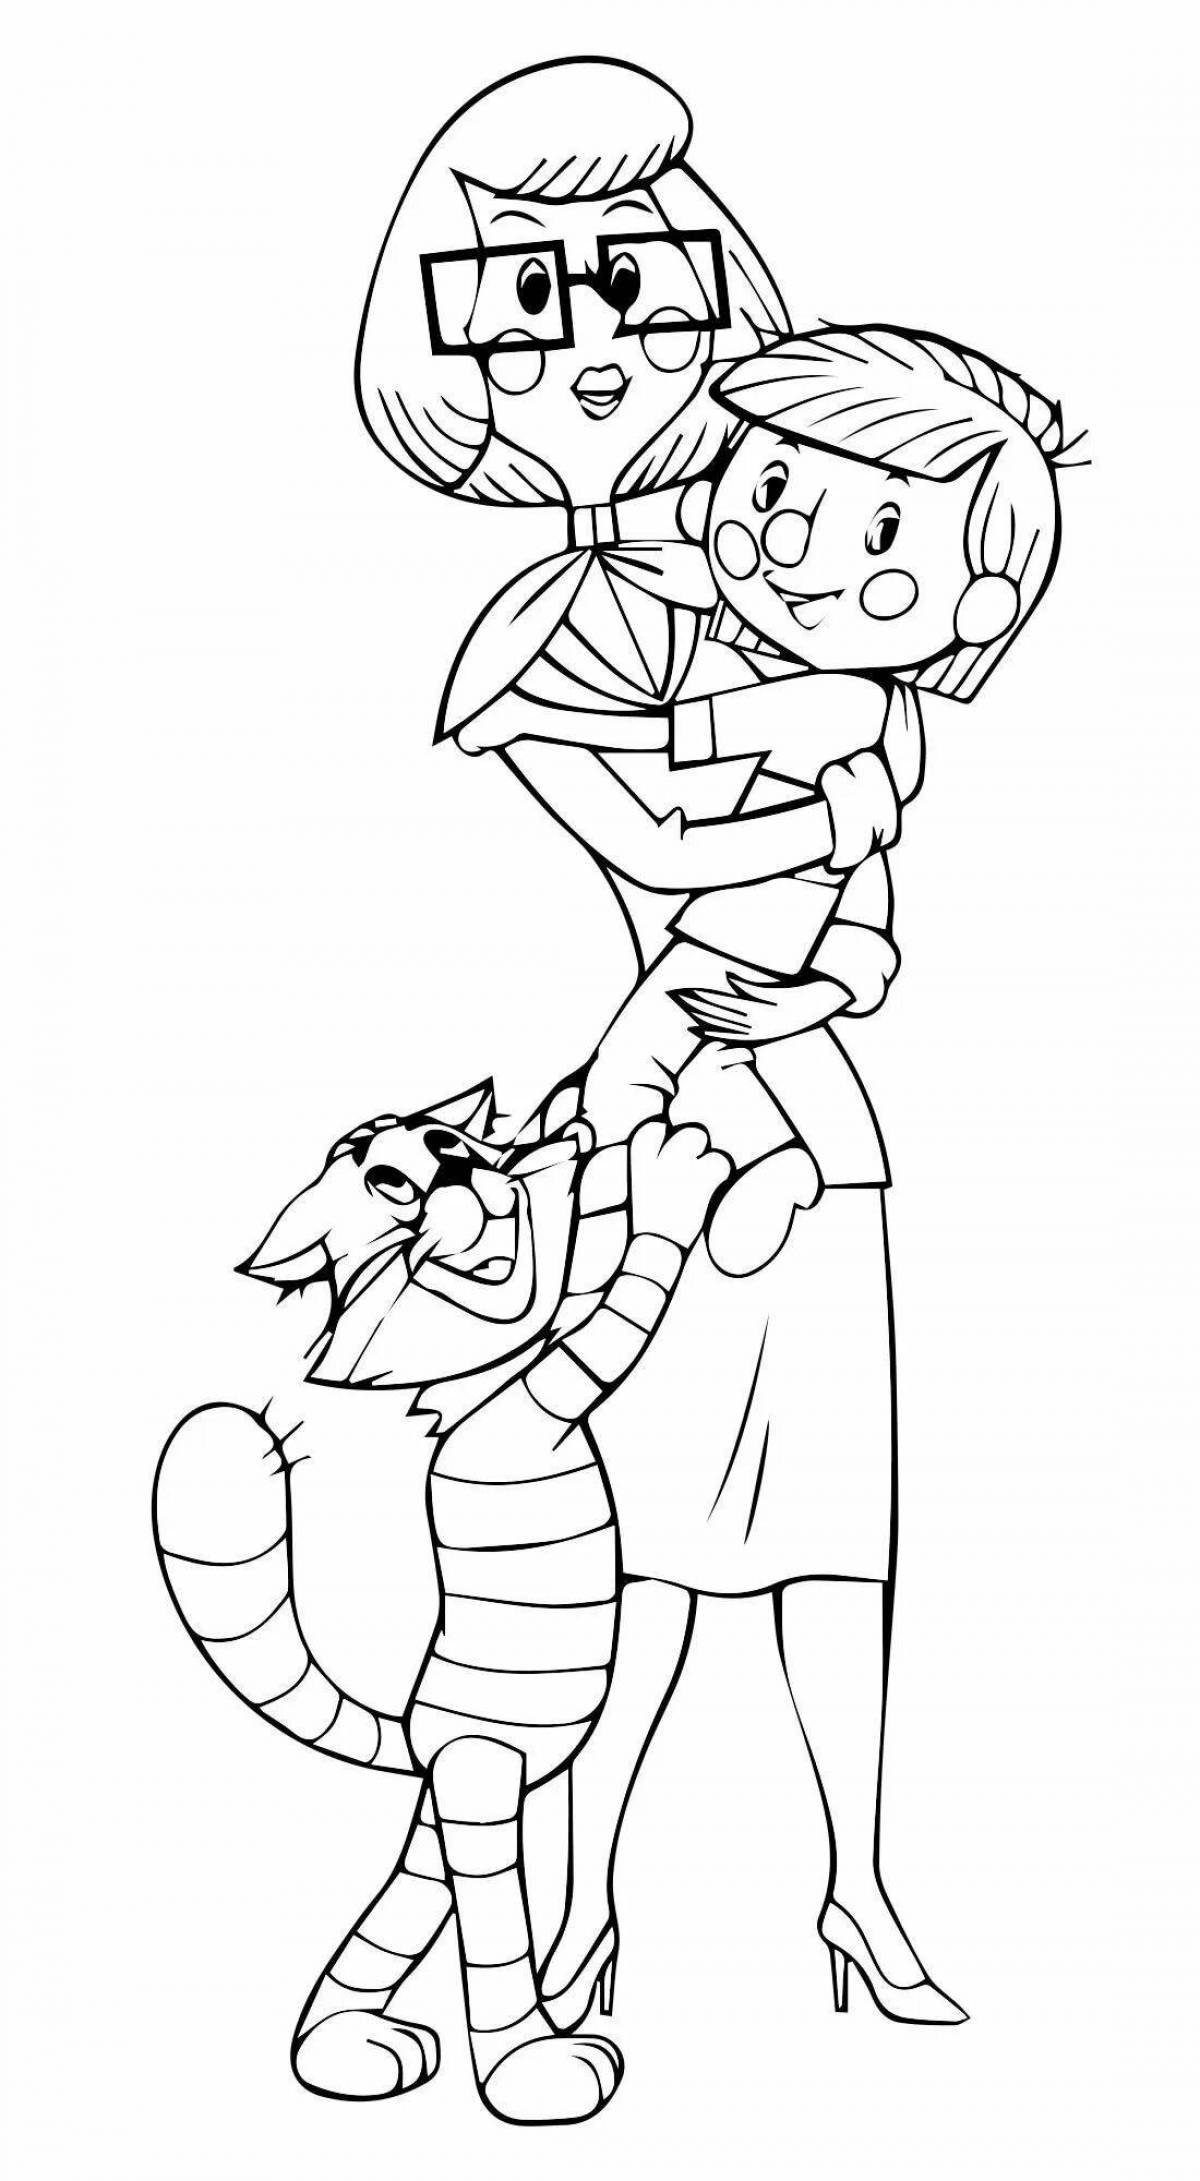 Great sailor skin coloring page for beginners